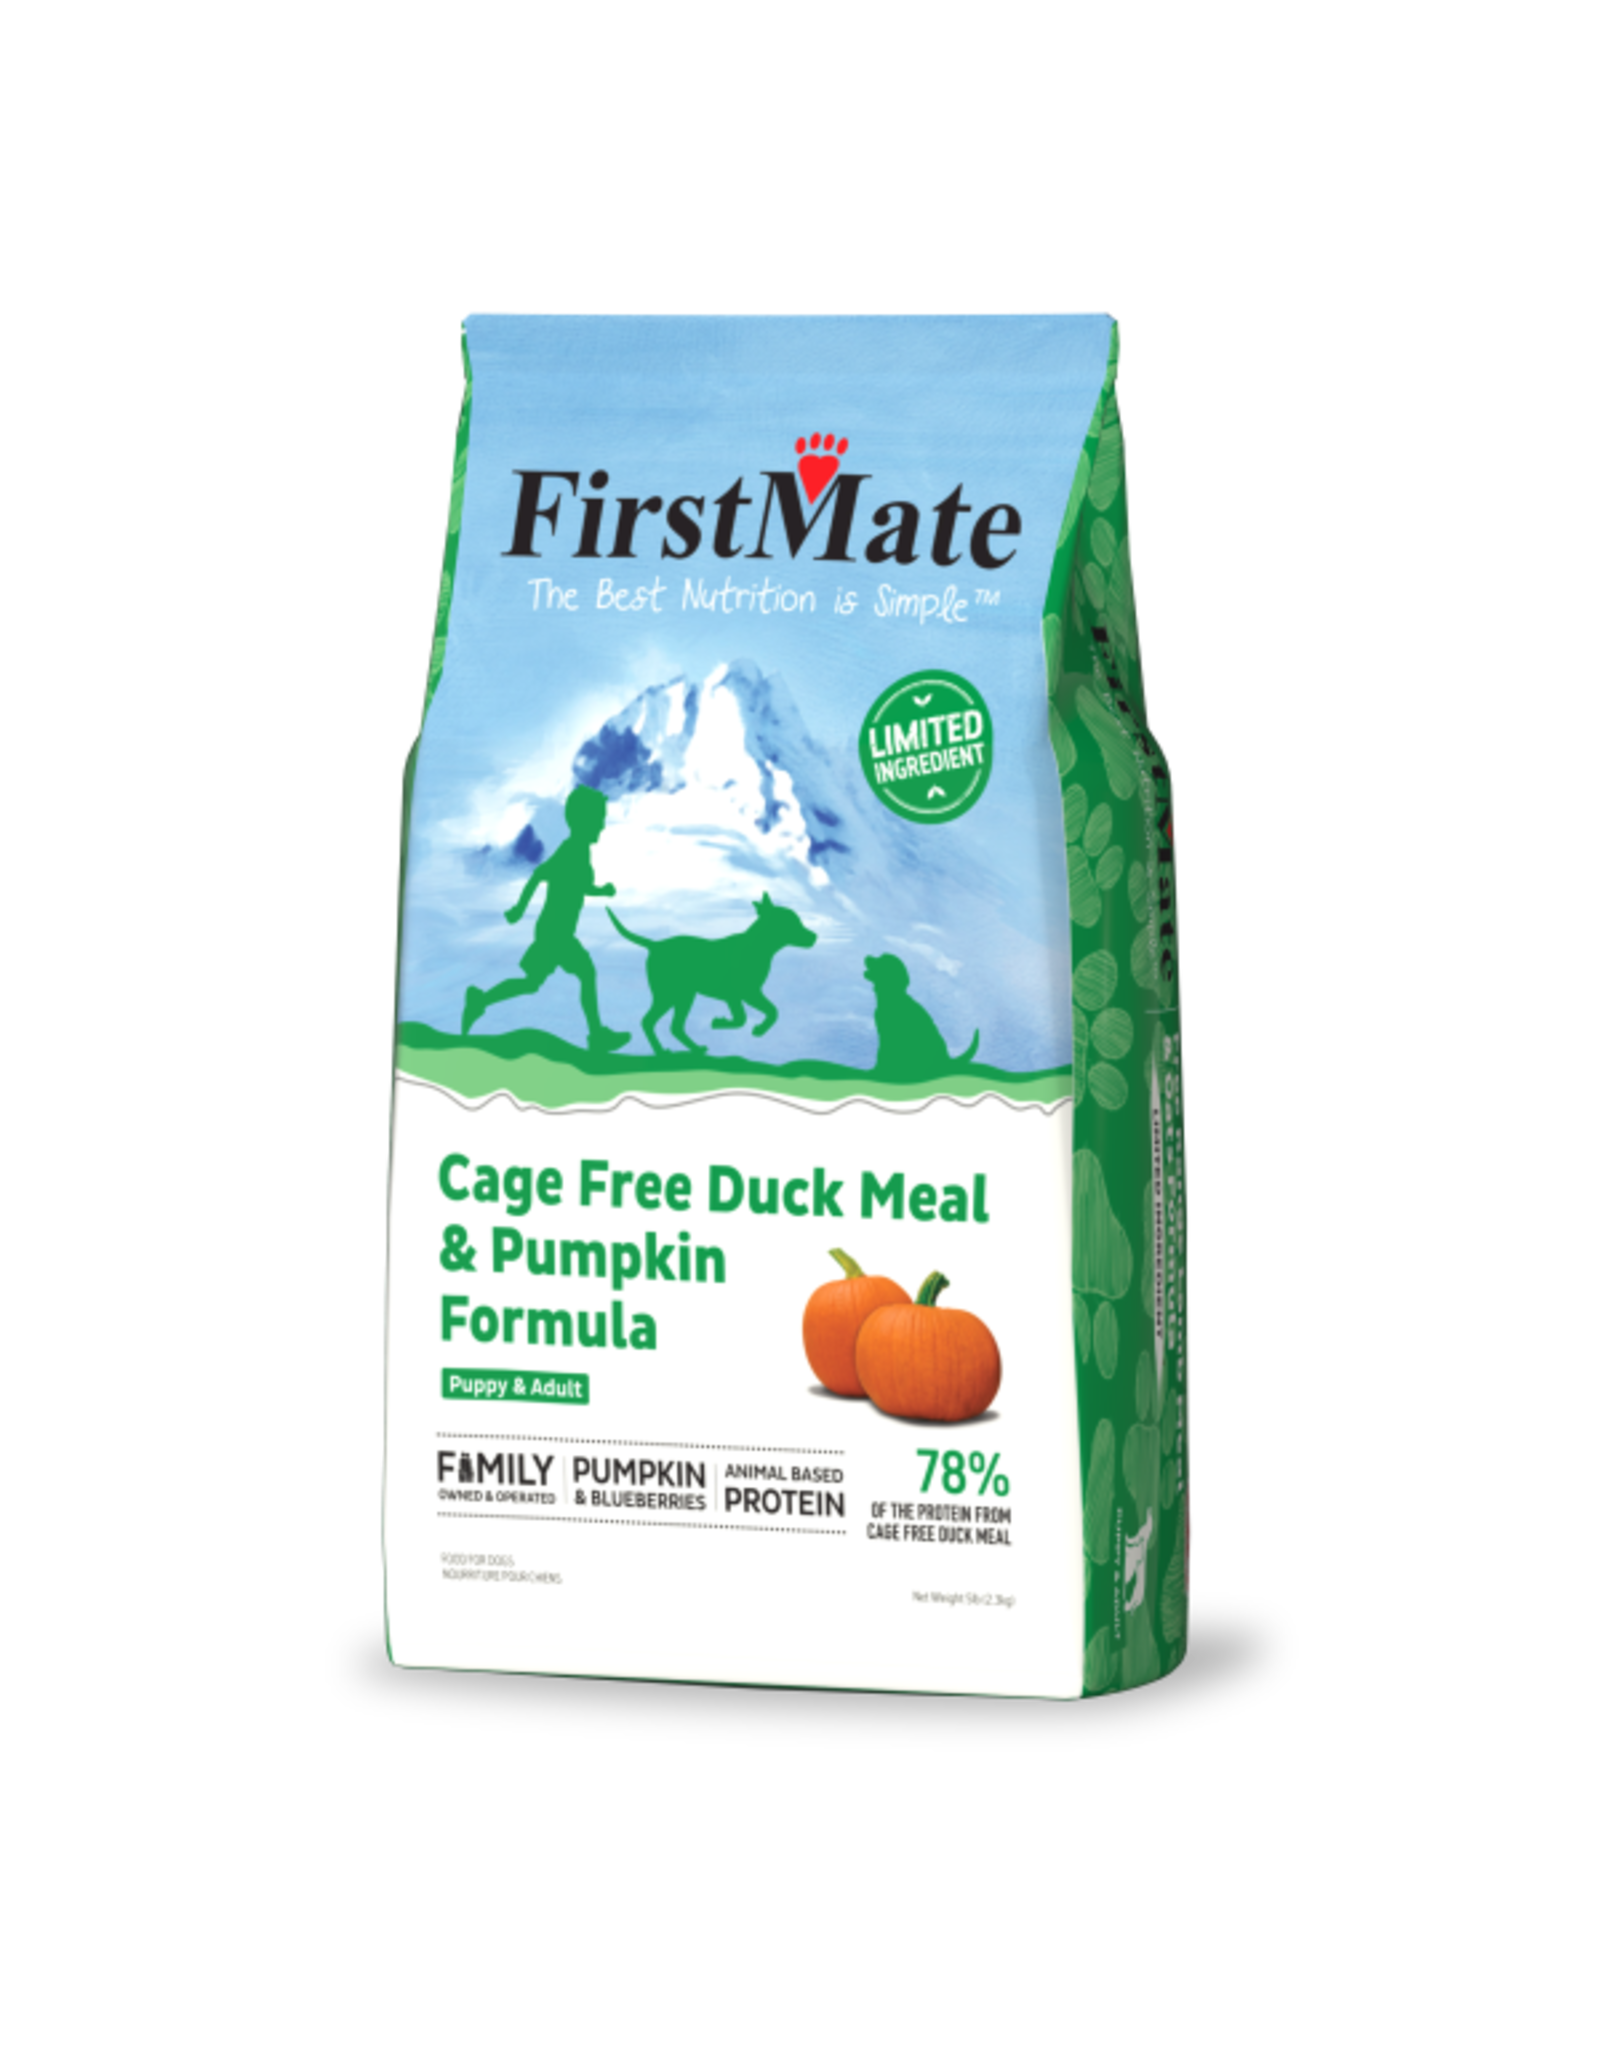 FirstMate Cage Free Duck Meal & Pumpkin Formula